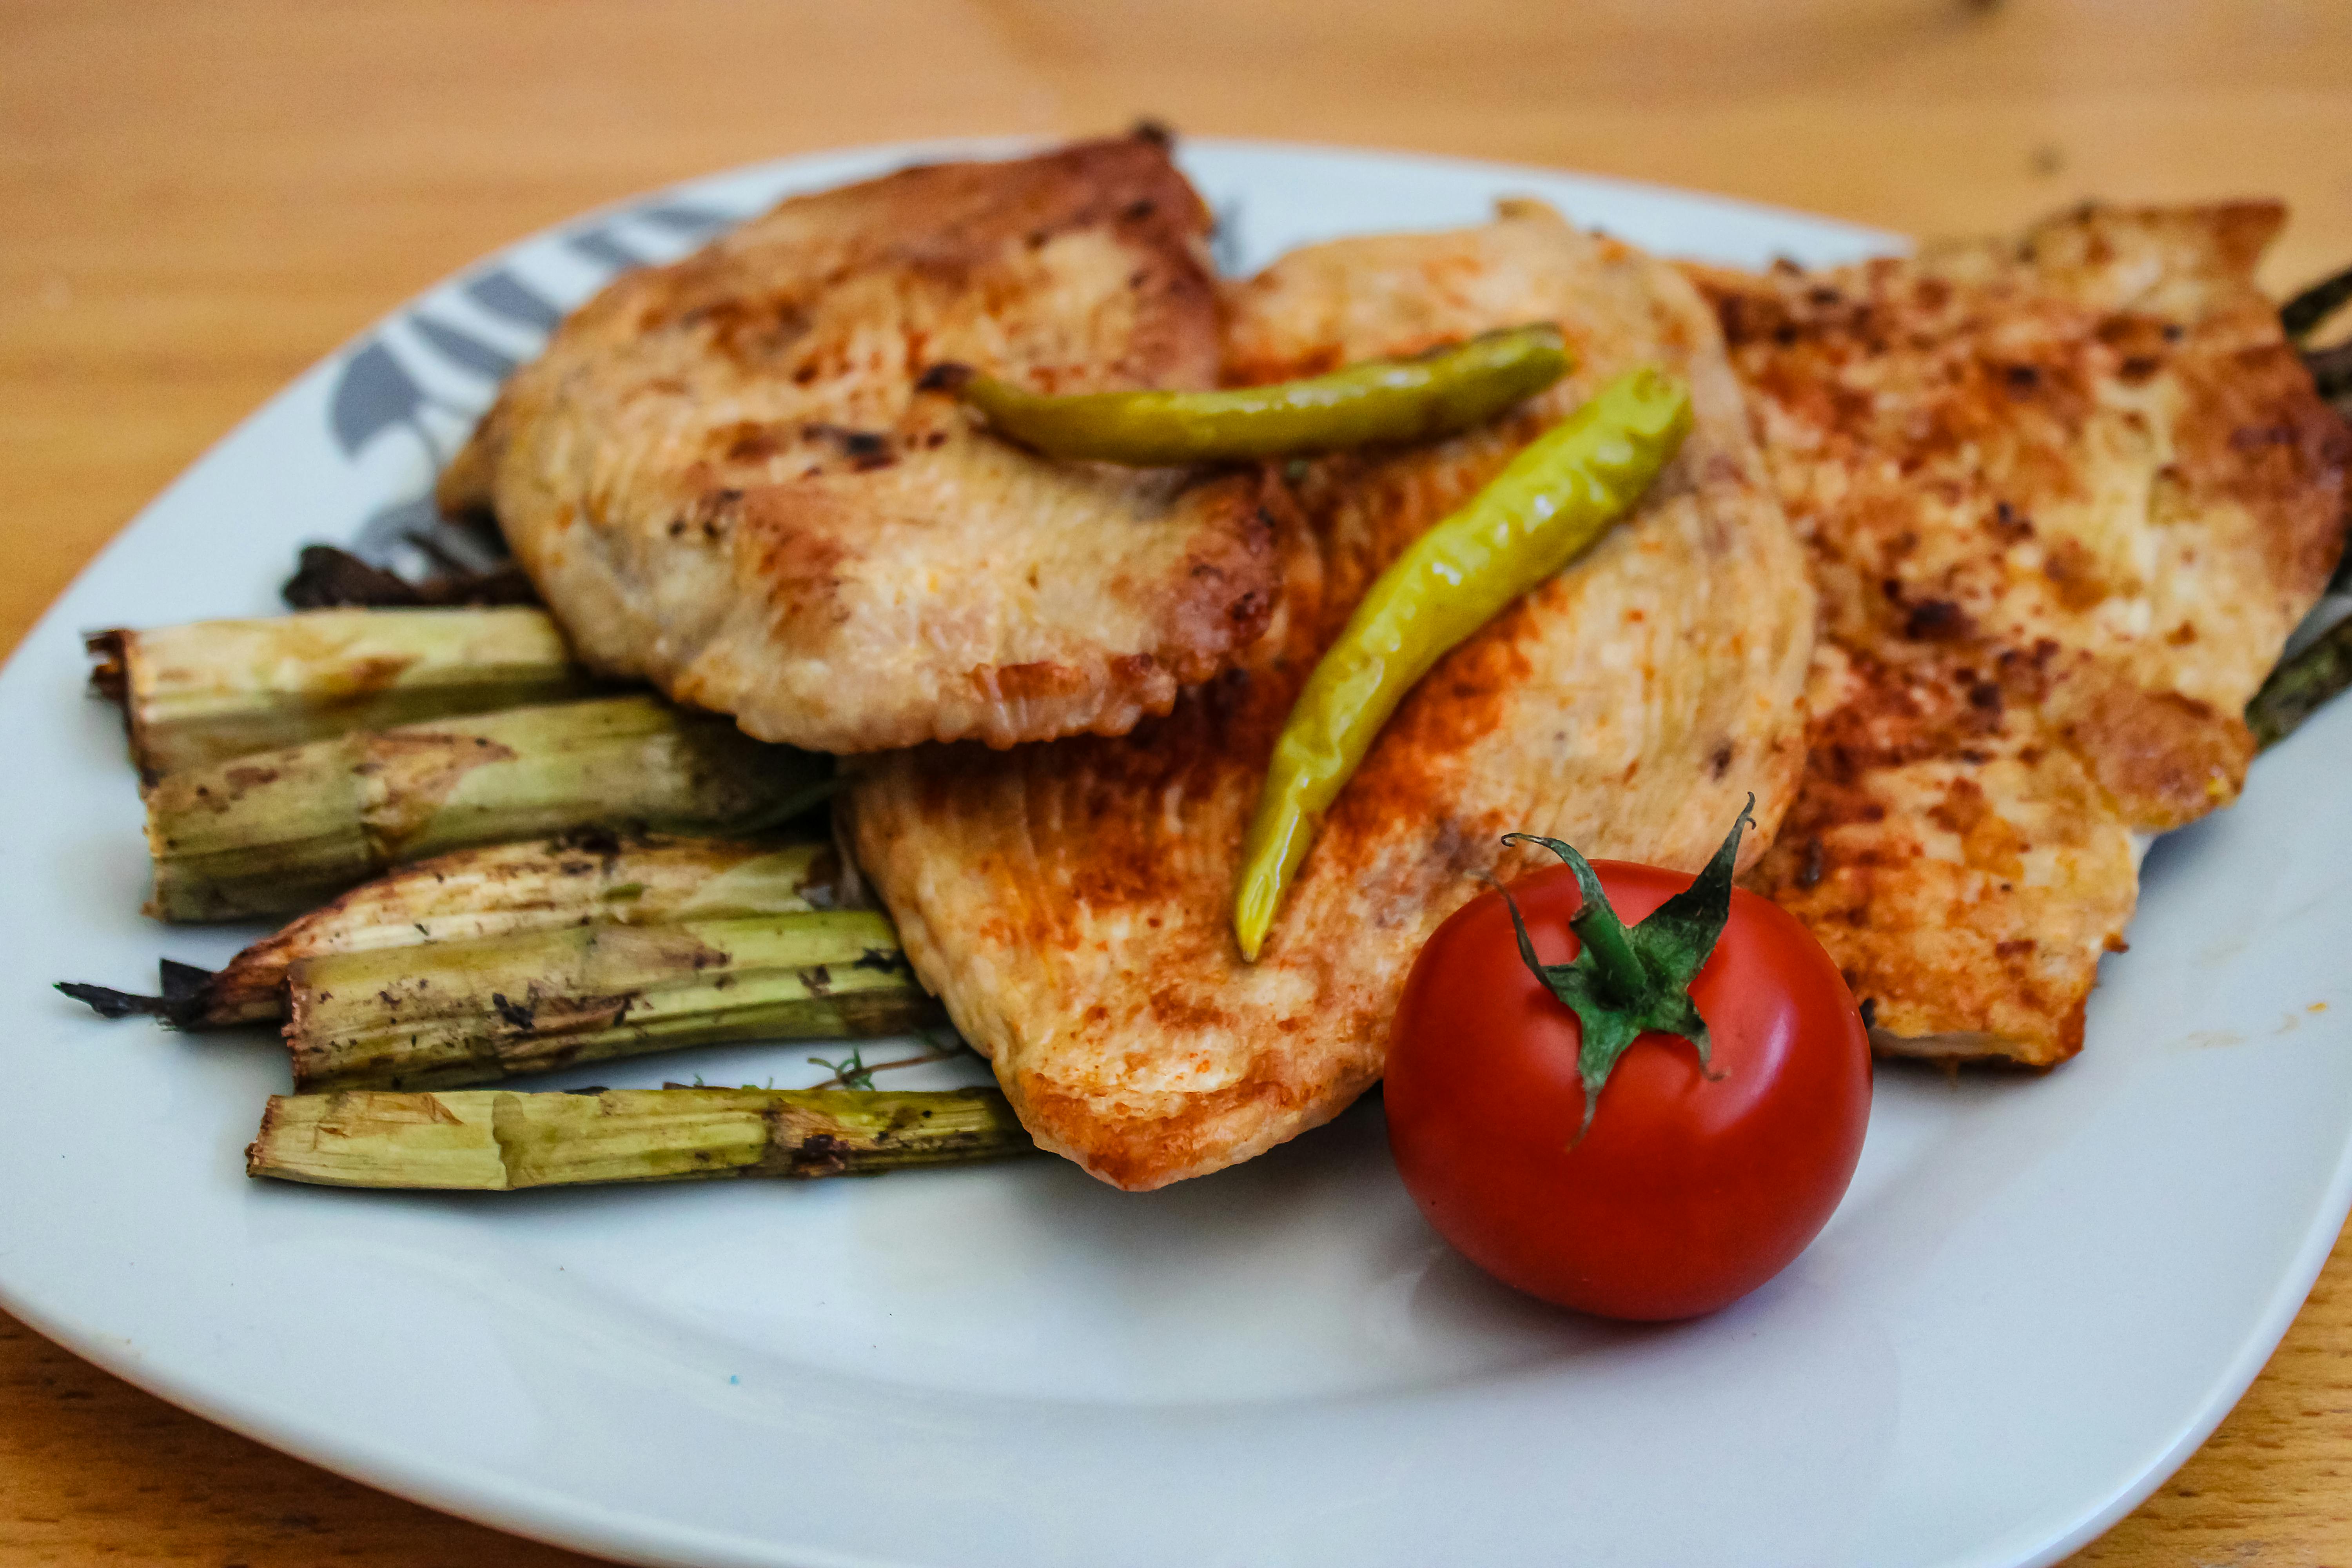 Chicken Breast: Lean Protein Powerhouse - one of the 7 Power Foods to Supercharge Your Muscle Growth (Backed by Science)